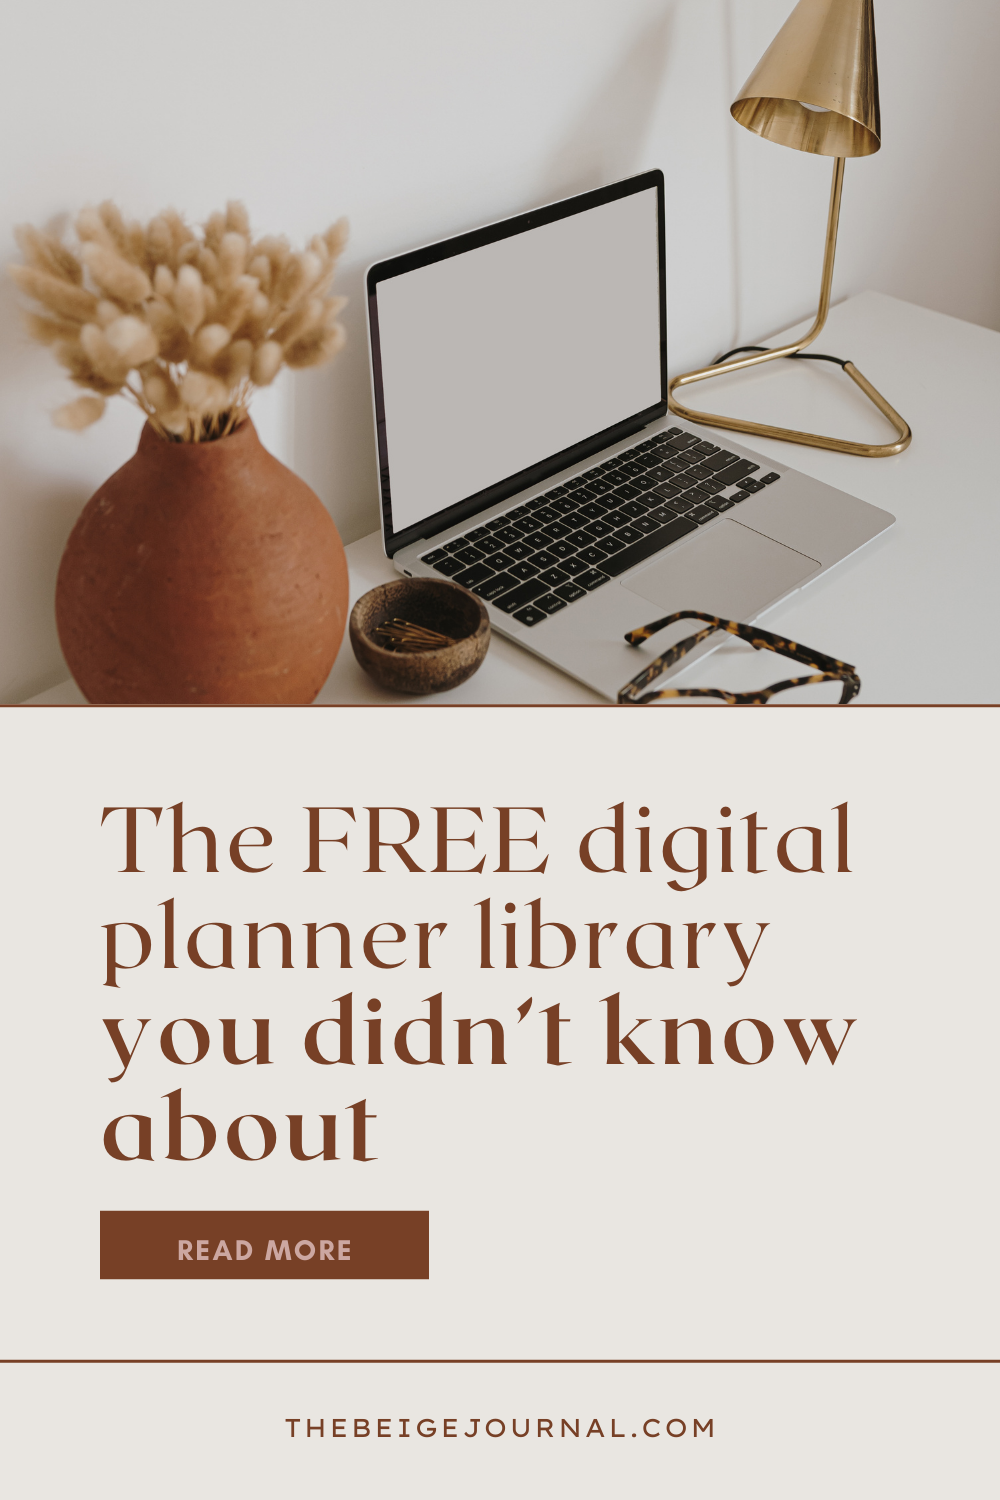 The FREE digital planner library you didn’t know about